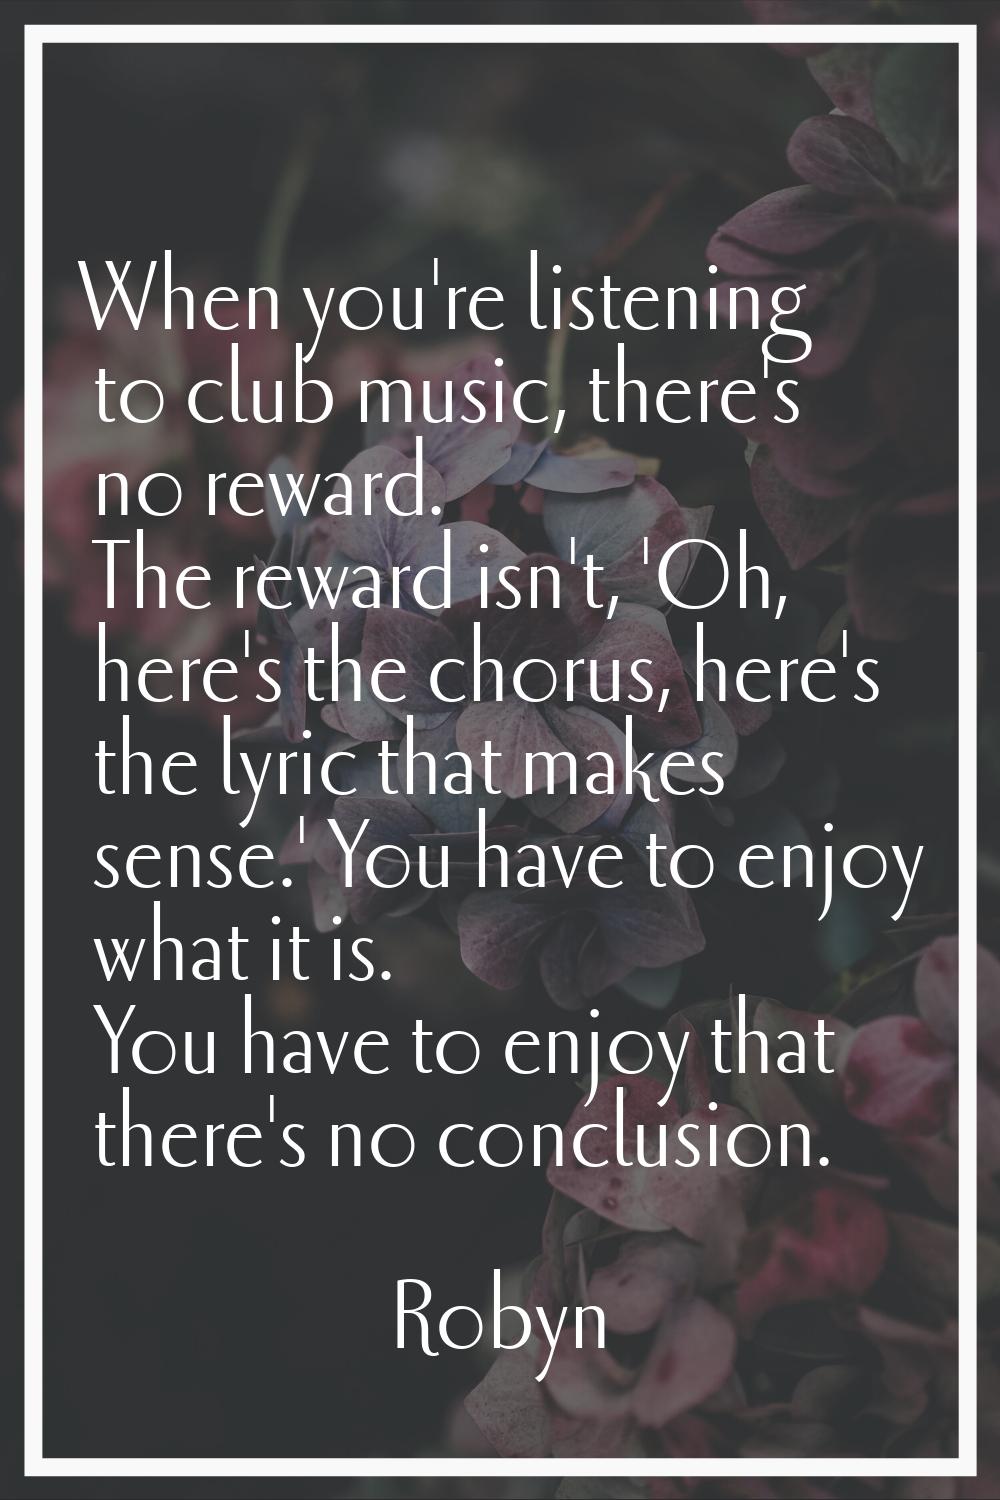 When you're listening to club music, there's no reward. The reward isn't, 'Oh, here's the chorus, h